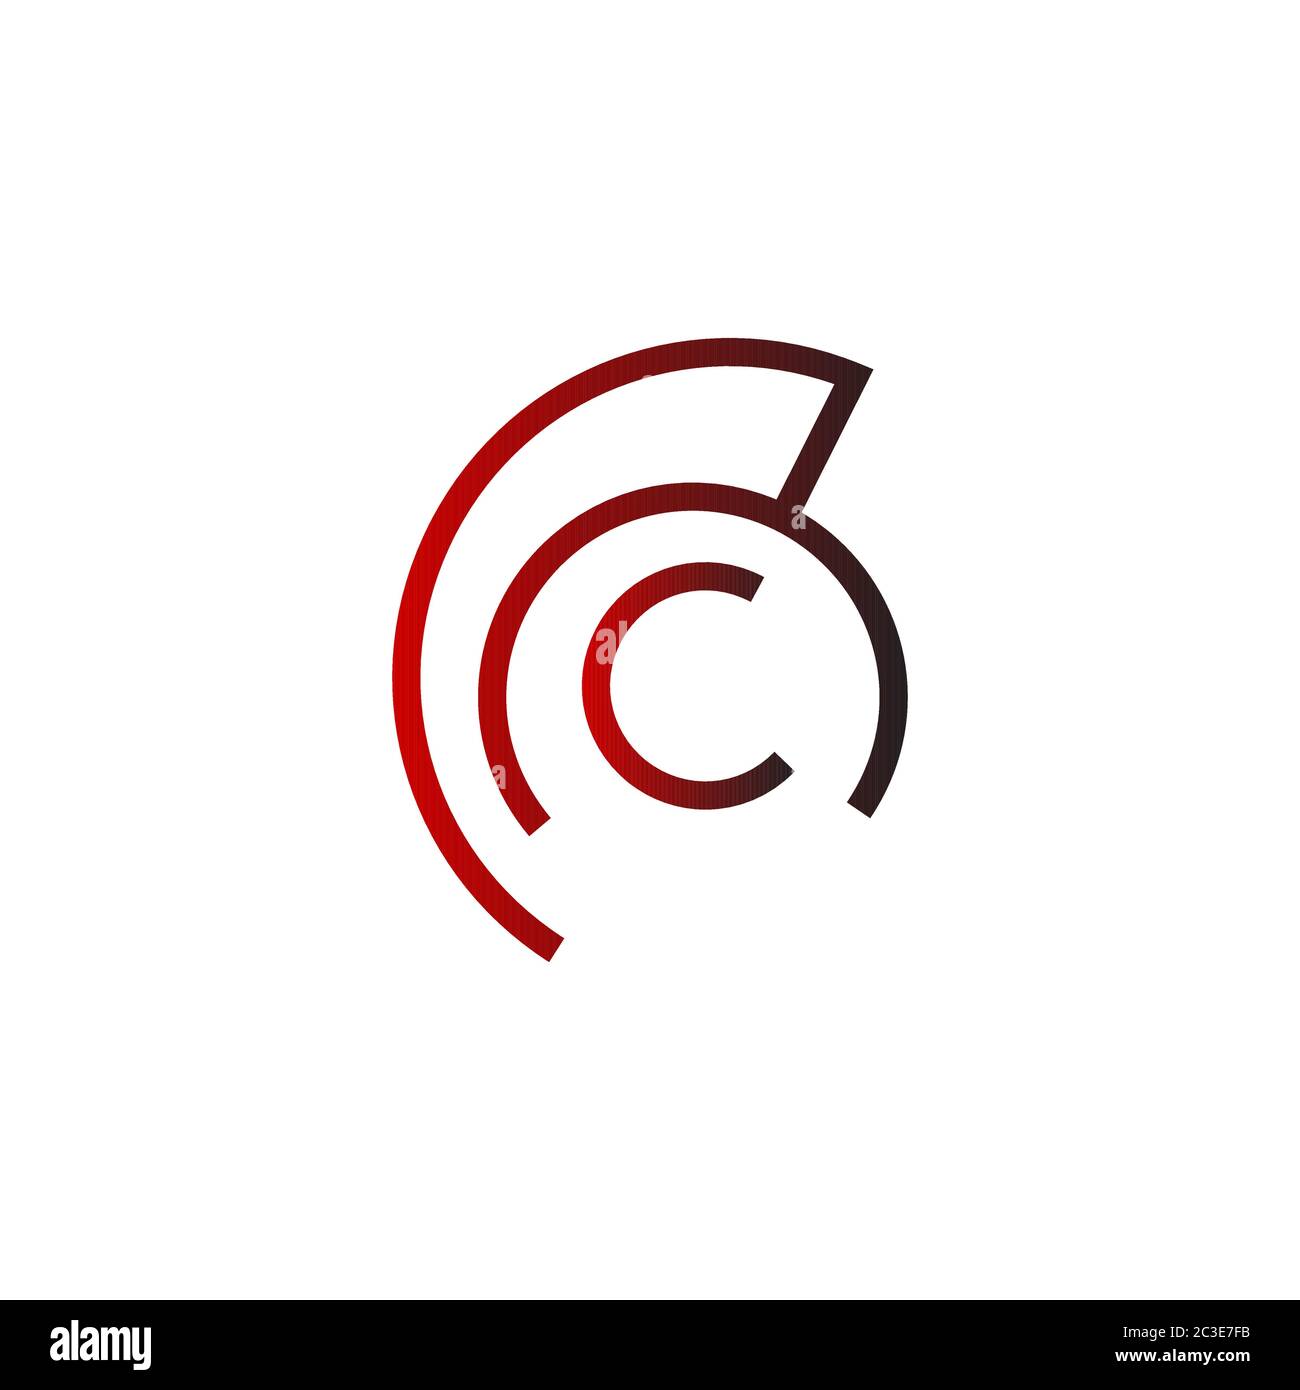 Spartan, letter C logo template, line design concept, isolated on white background. Stock Vector